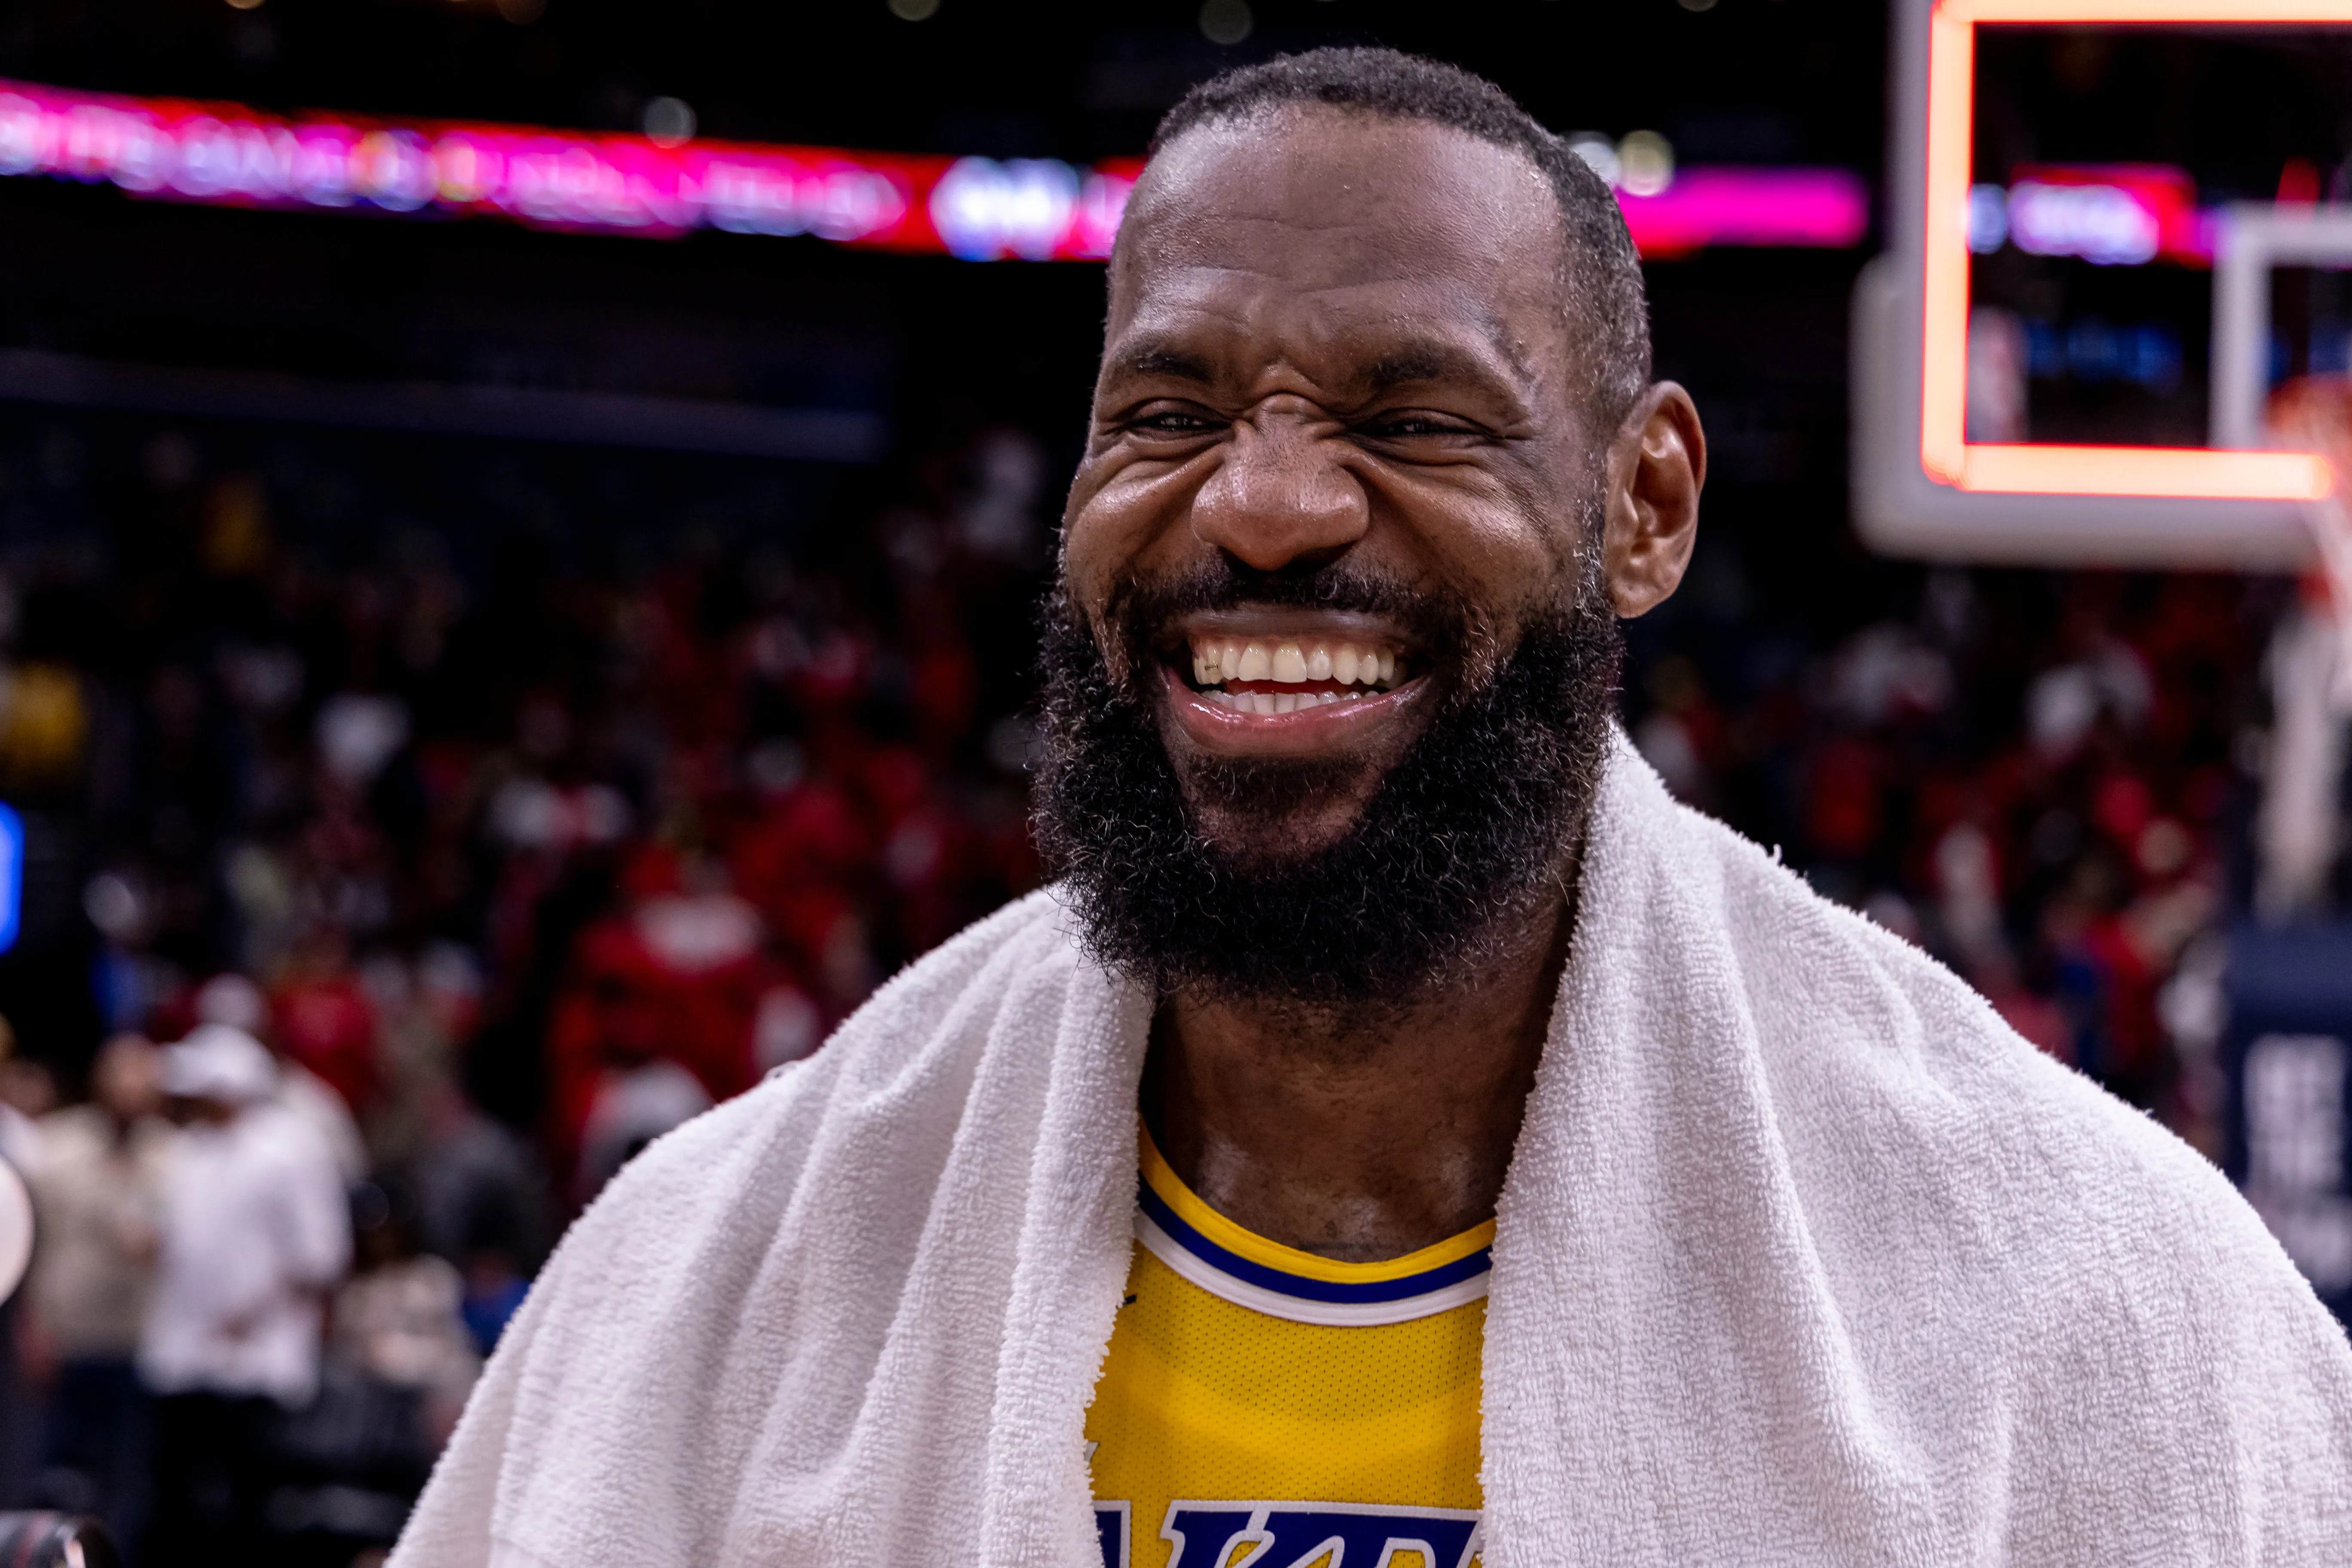 Update on LeBron James role in Los Angeles Lakers head coach search